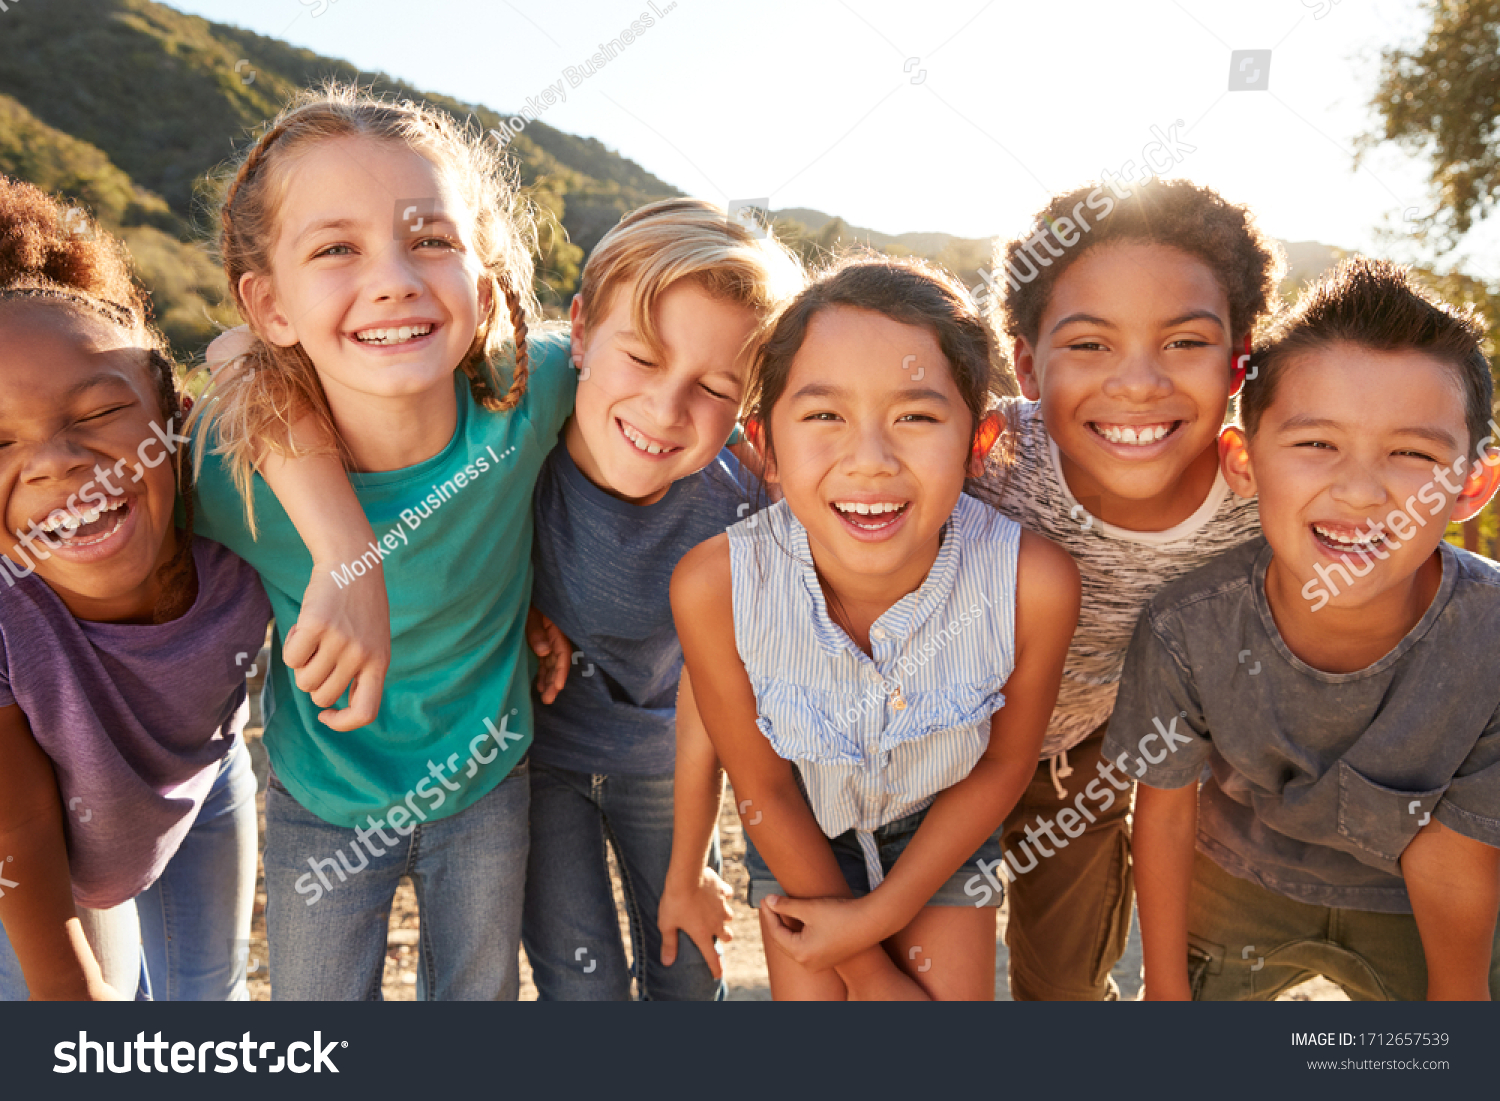 Portrait Of Multi-Cultural Children Hanging Out With Friends In The Countryside Together #1712657539